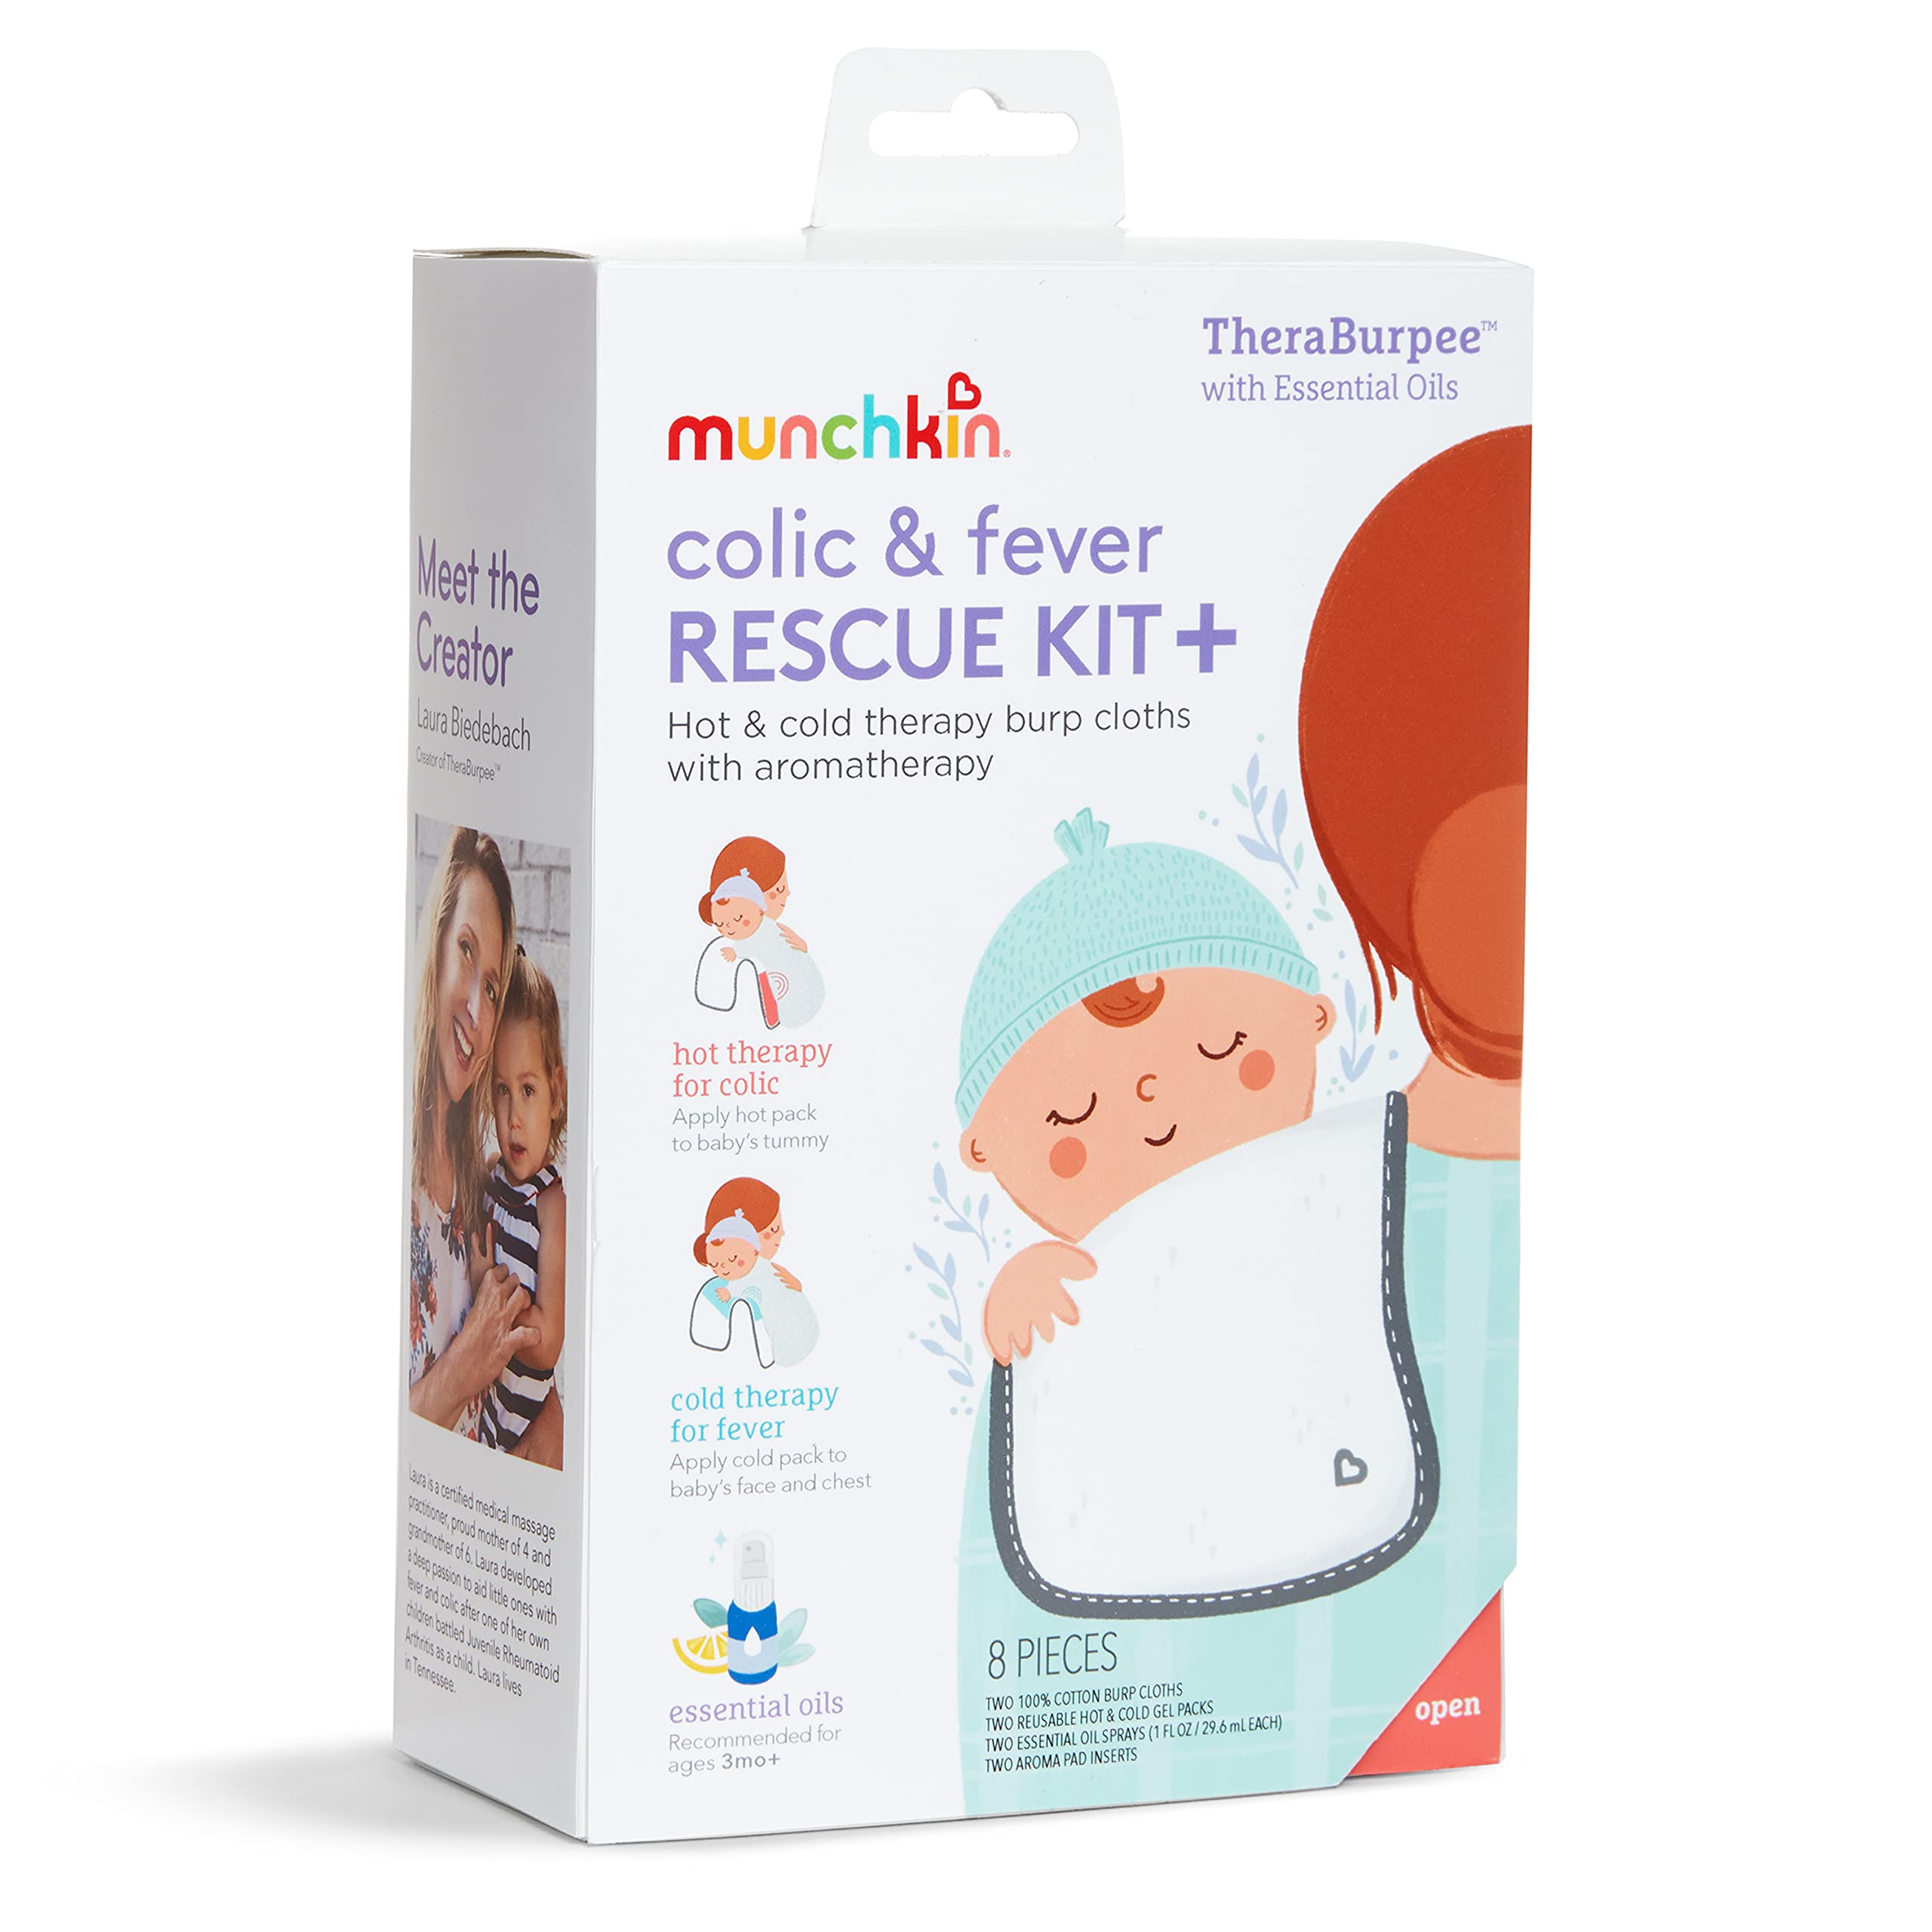 Munchkin® Theraburpee with Essential Oils: Colic & Fever Rescue Kit + with Hot & Cold Therapy Burp Cloths & Aromatherapy